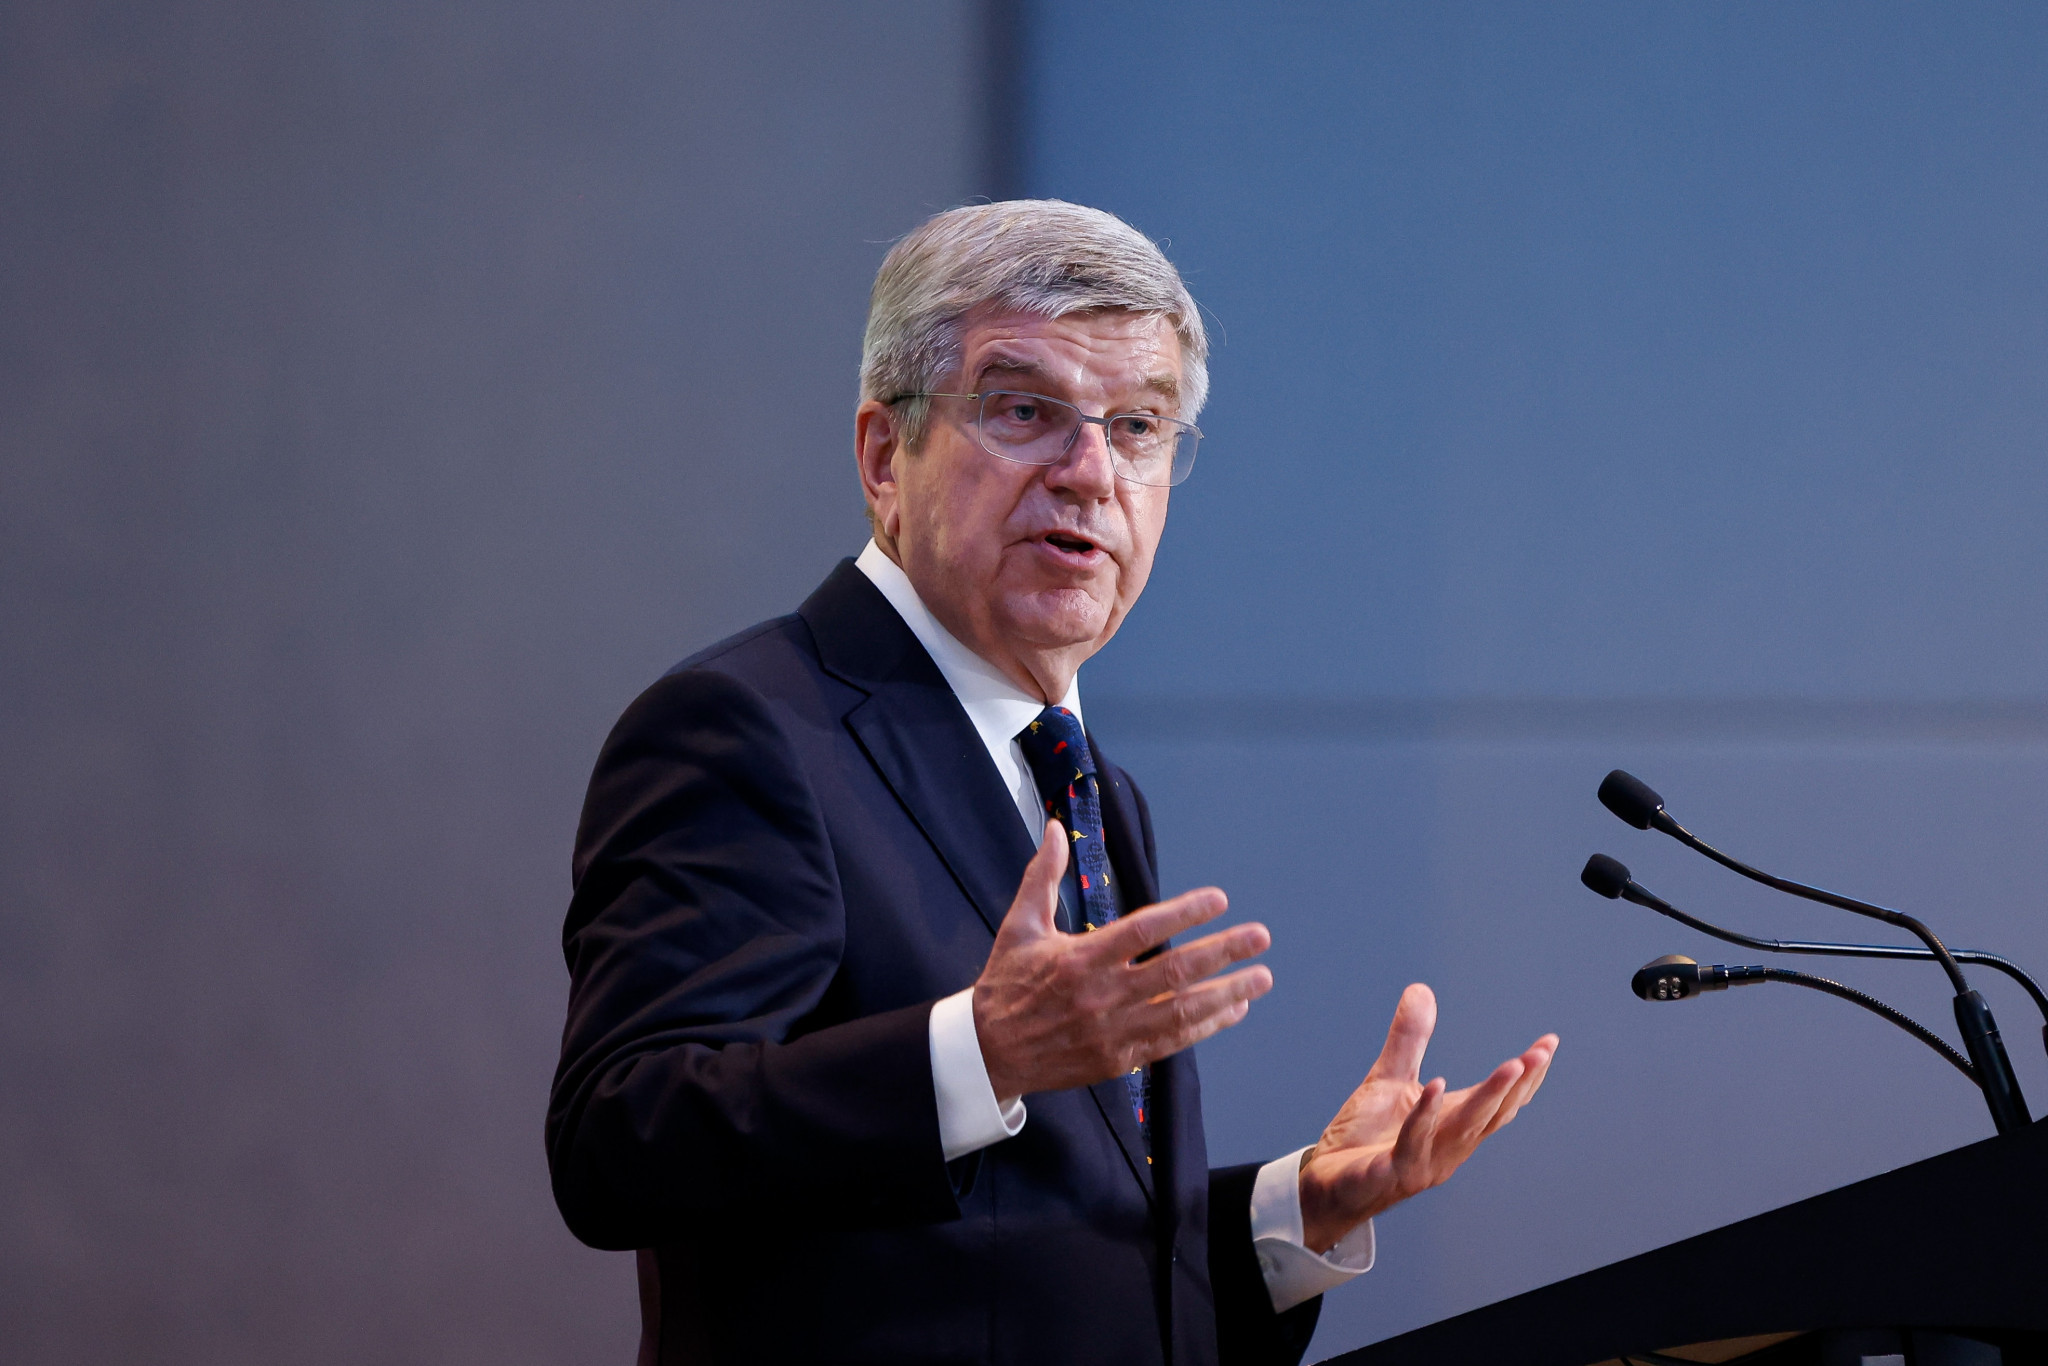 IOC President Thomas Bach is set to address the organisation's response to the war in Ukraine ©Getty Images